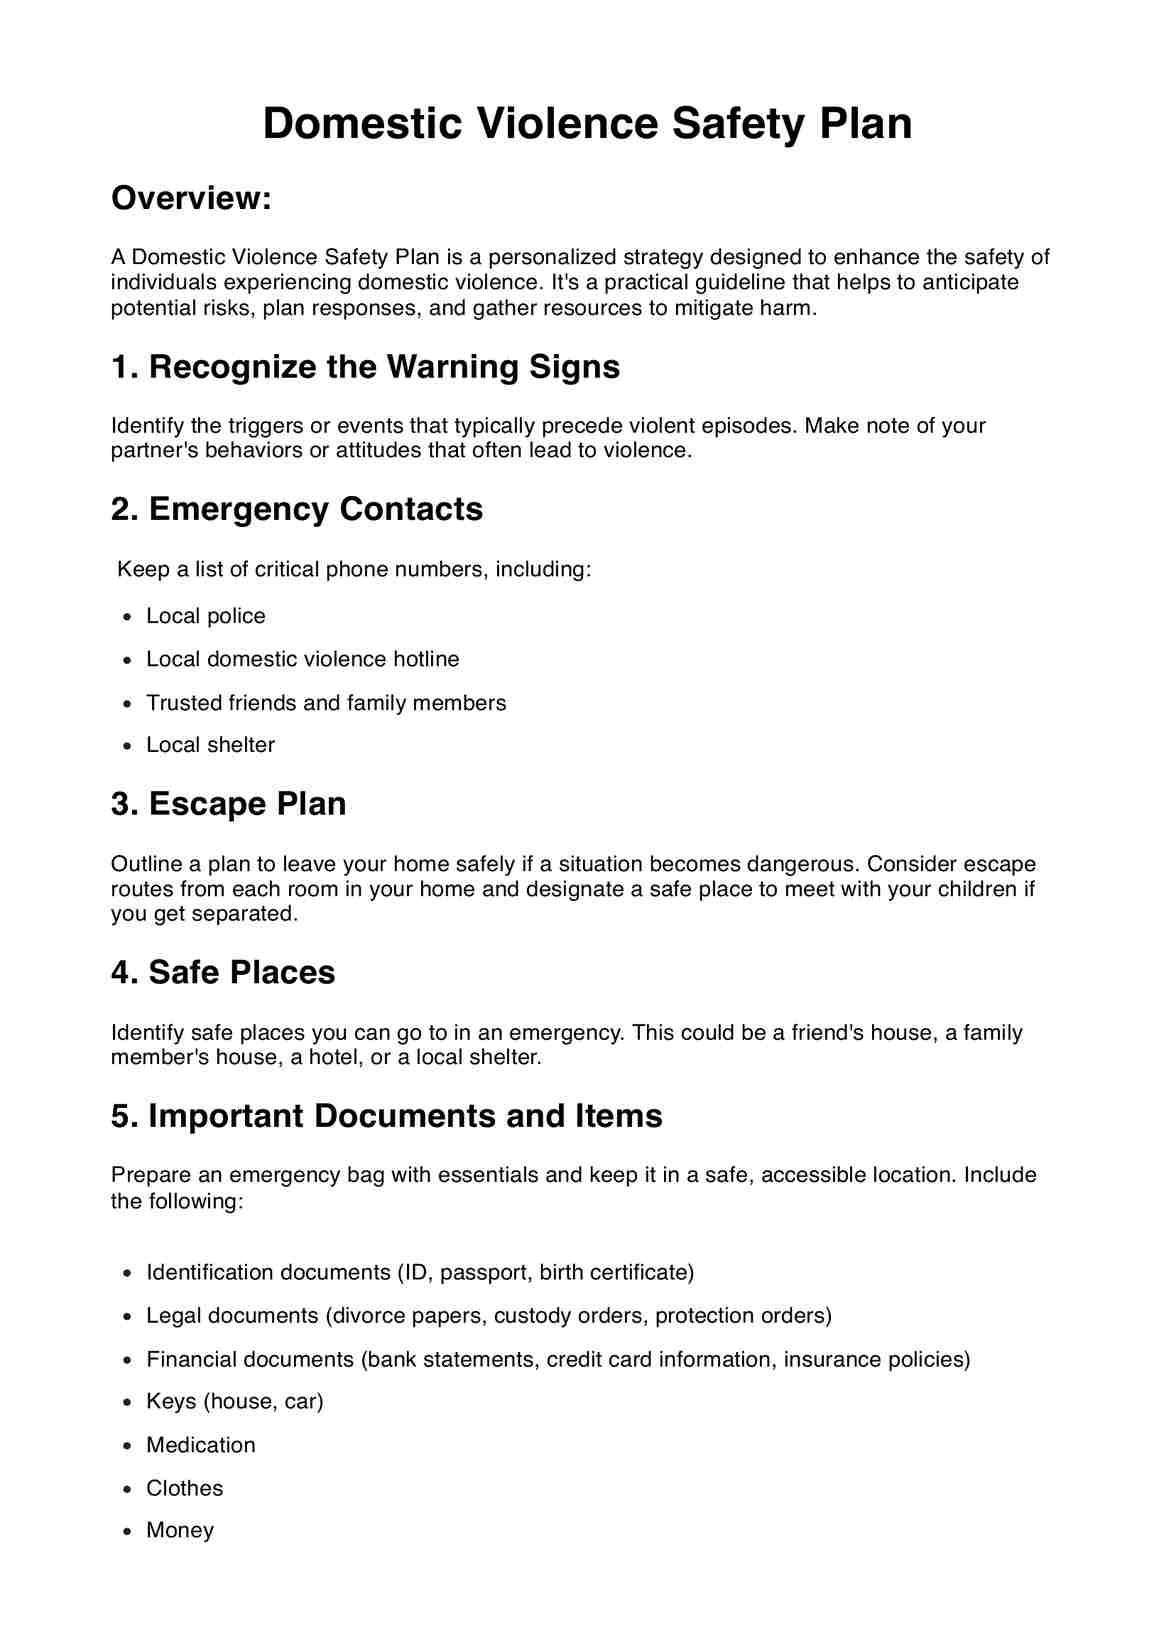 Domestic Violence Safety Plan PDF Example